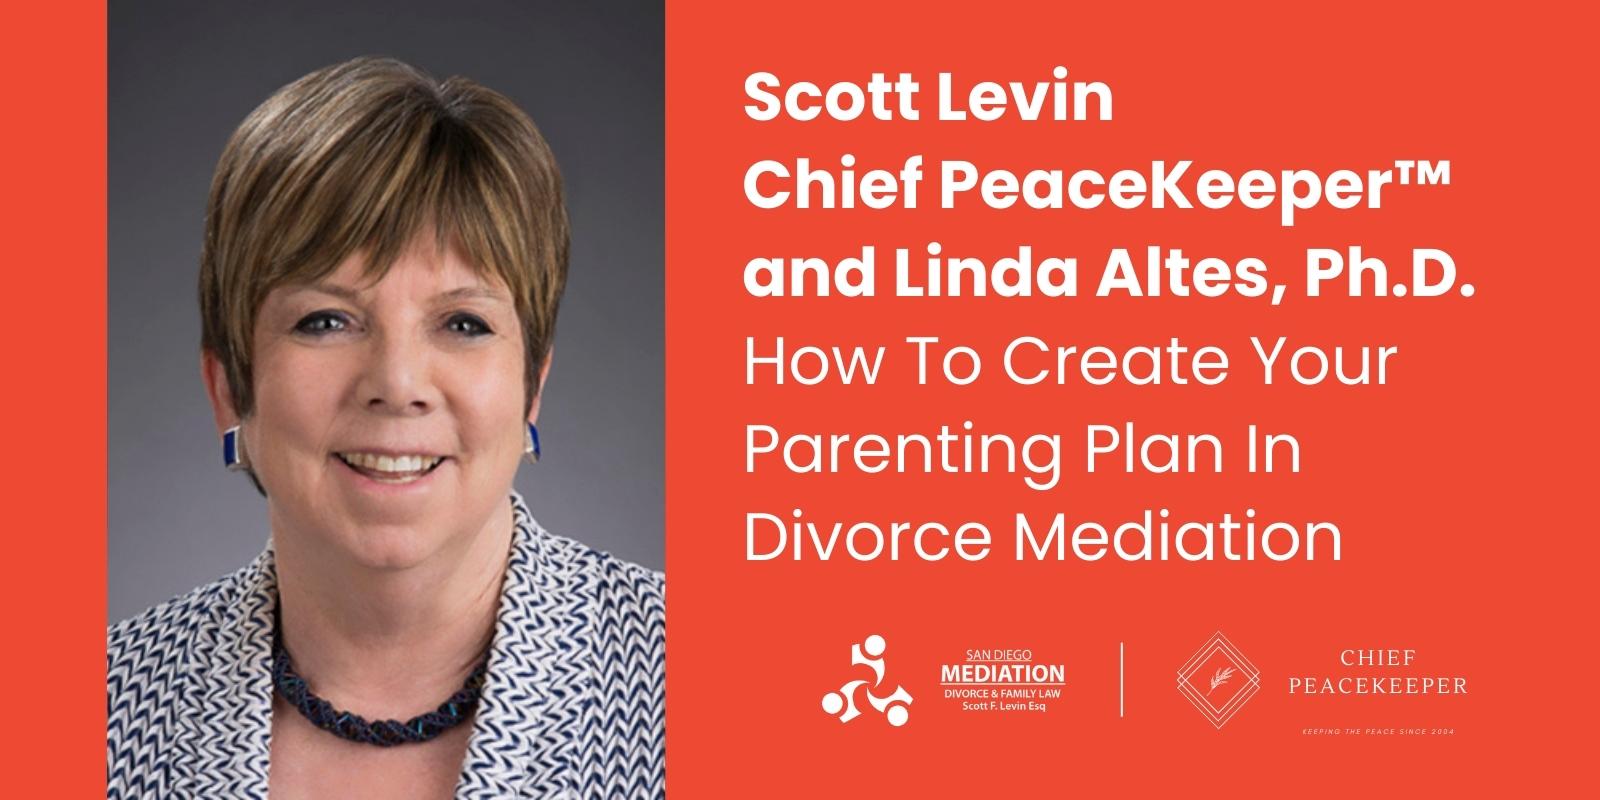 Linda Altes, Ph.D. How To Create Your Parenting Plan In Divorce Mediation